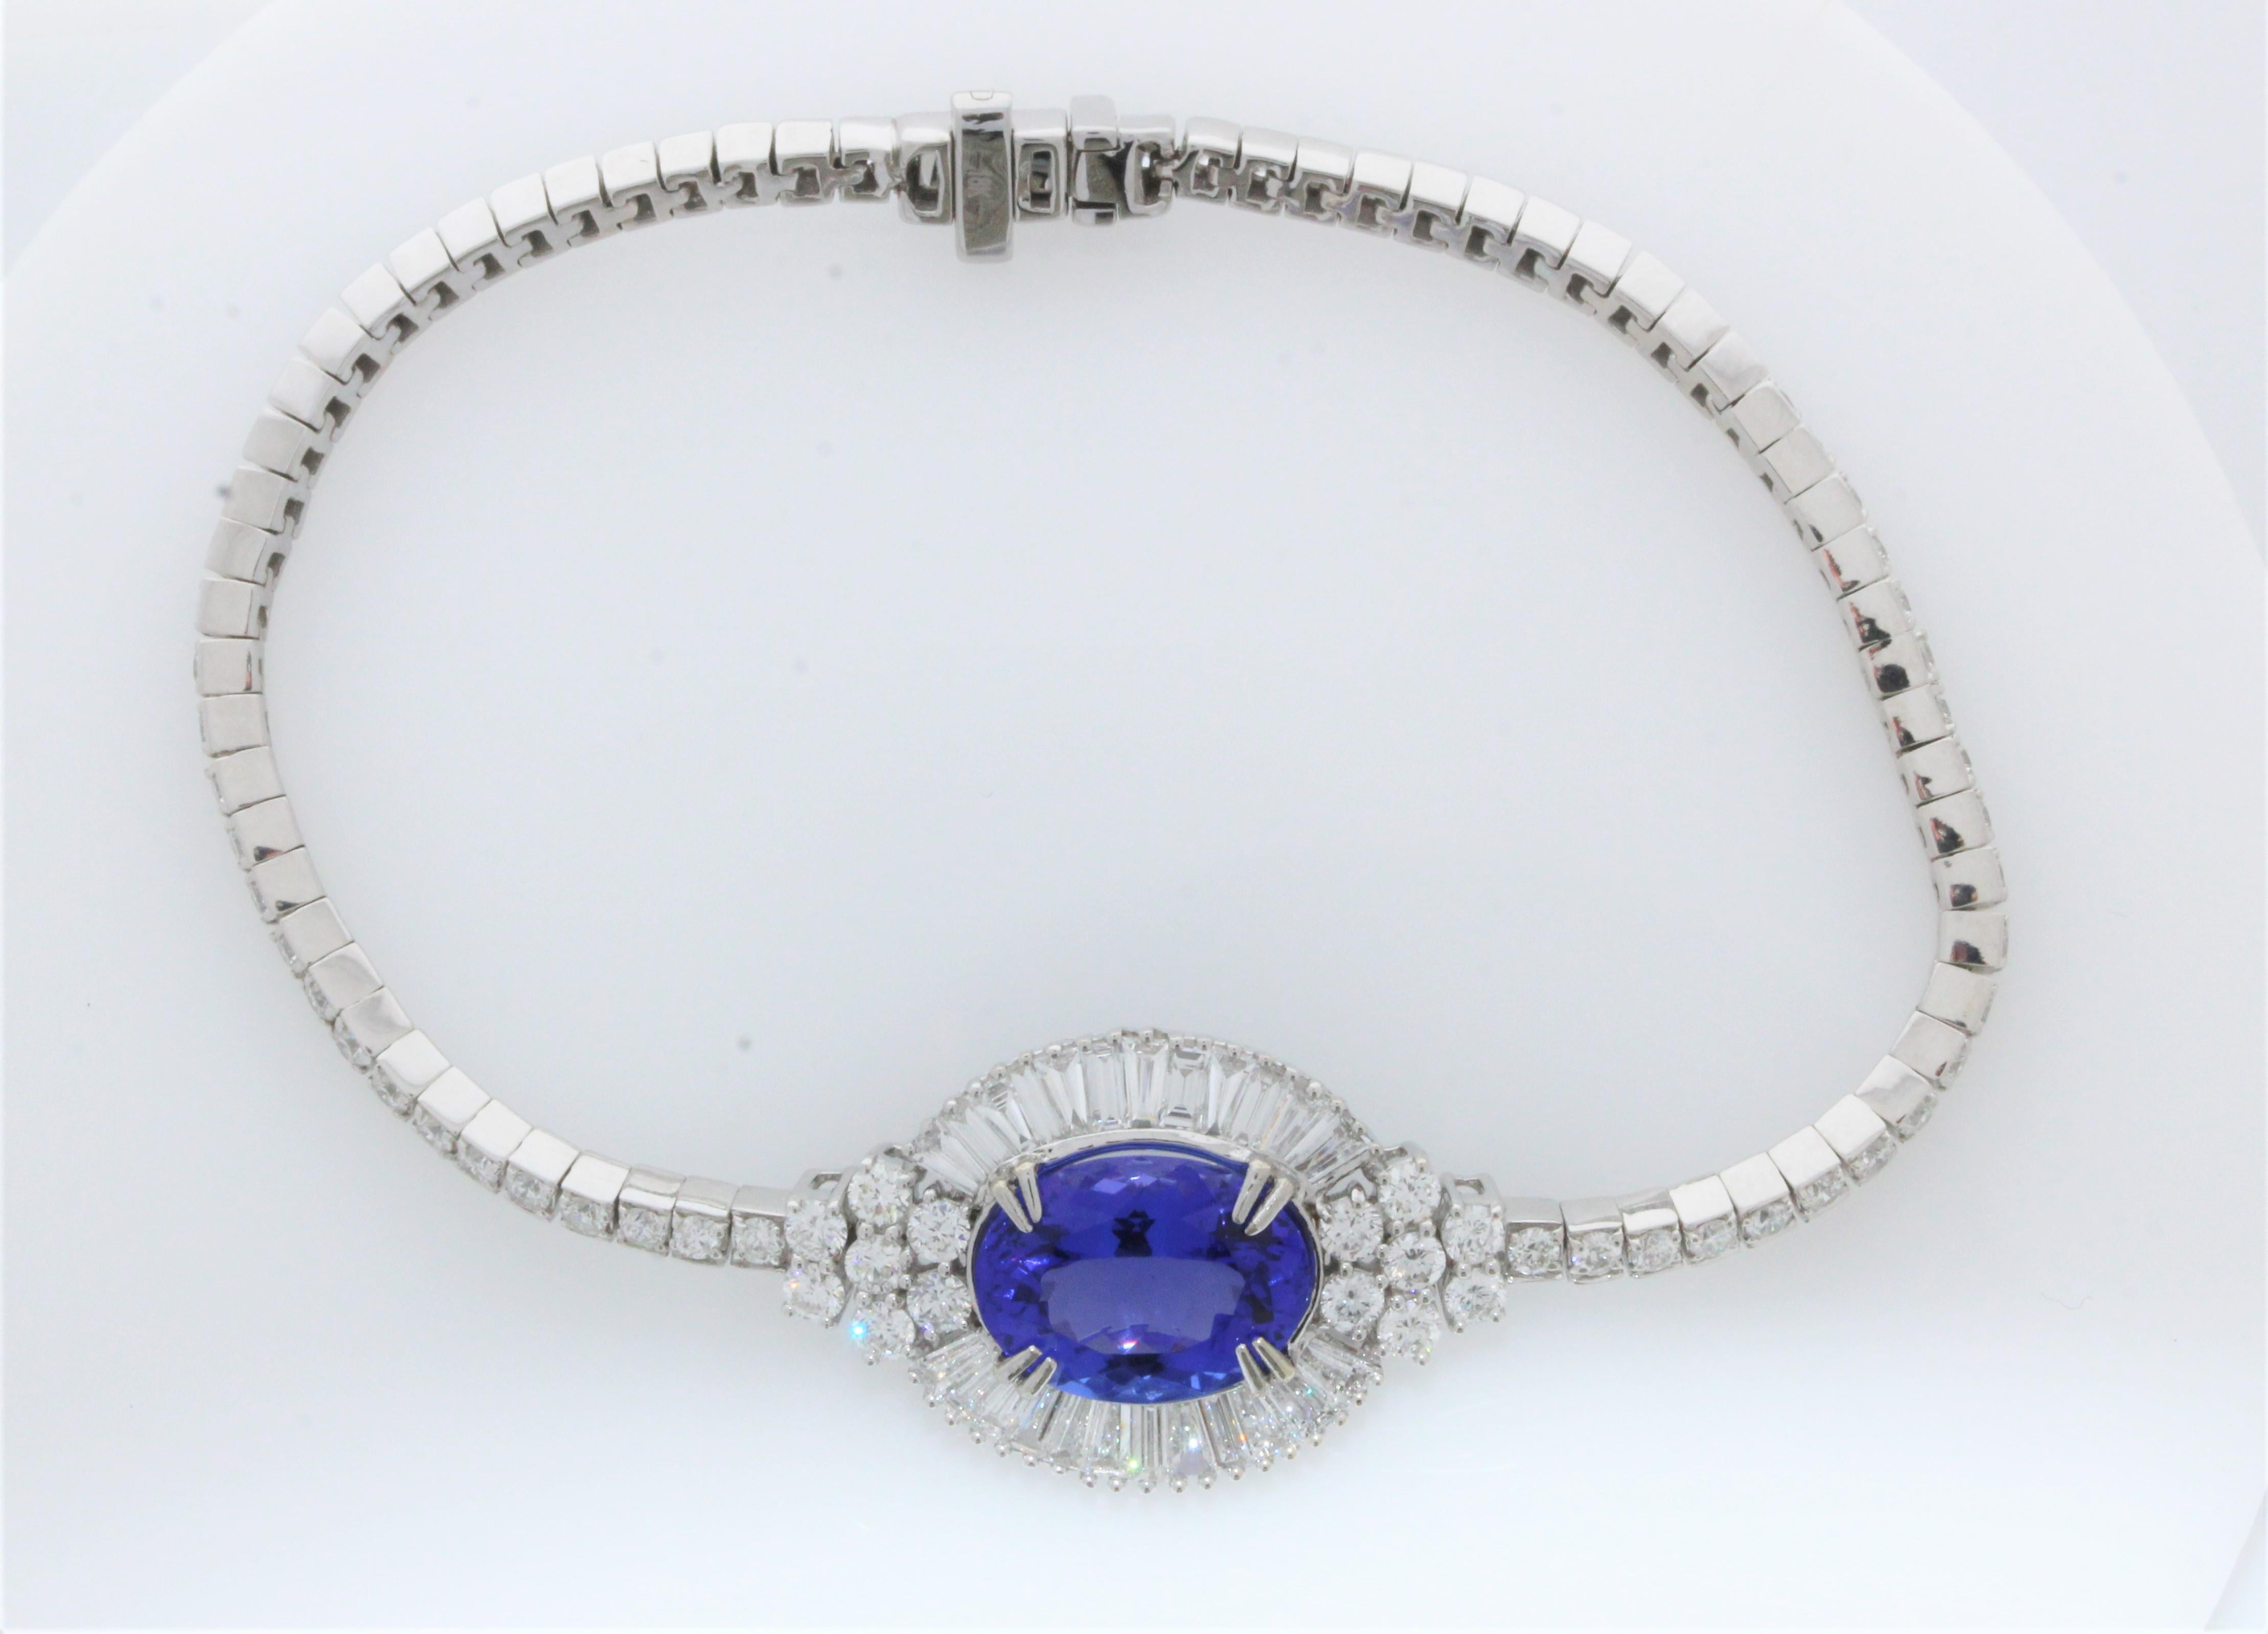 This very unique bracelets consists of a gorgeous 5.68crat tanzanite that is surrounded by glistening diamonds, and throughout, that total up 5.46carats. The bracelet is set in 18k White Gold.